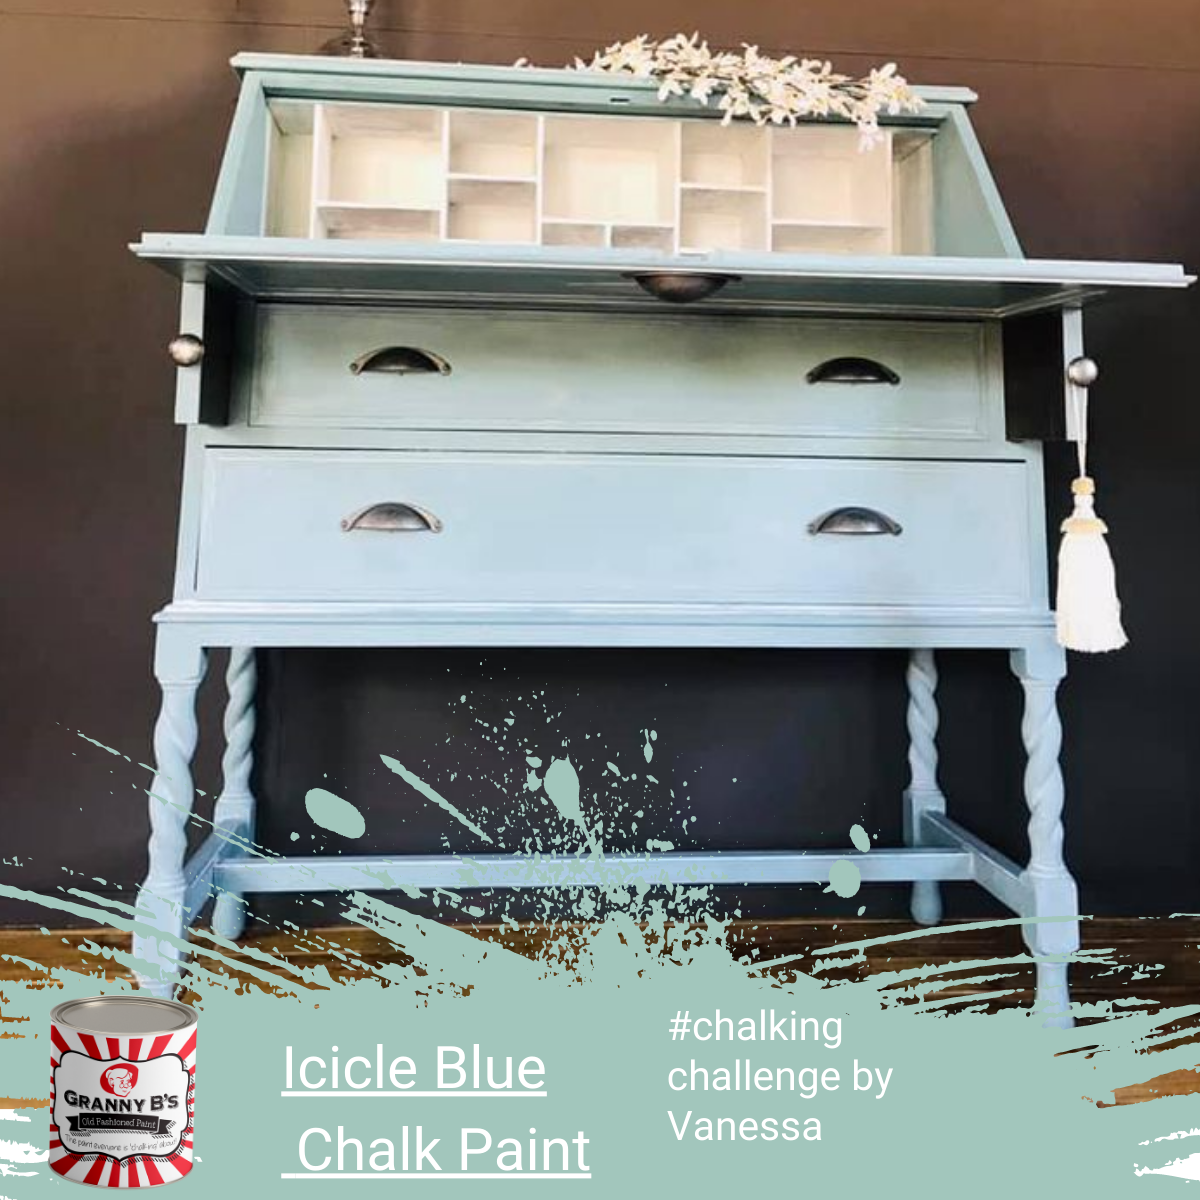 Chalkpaint - Icicle Blue (Vintage Blue) - Granny B's Old Fashioned Paint